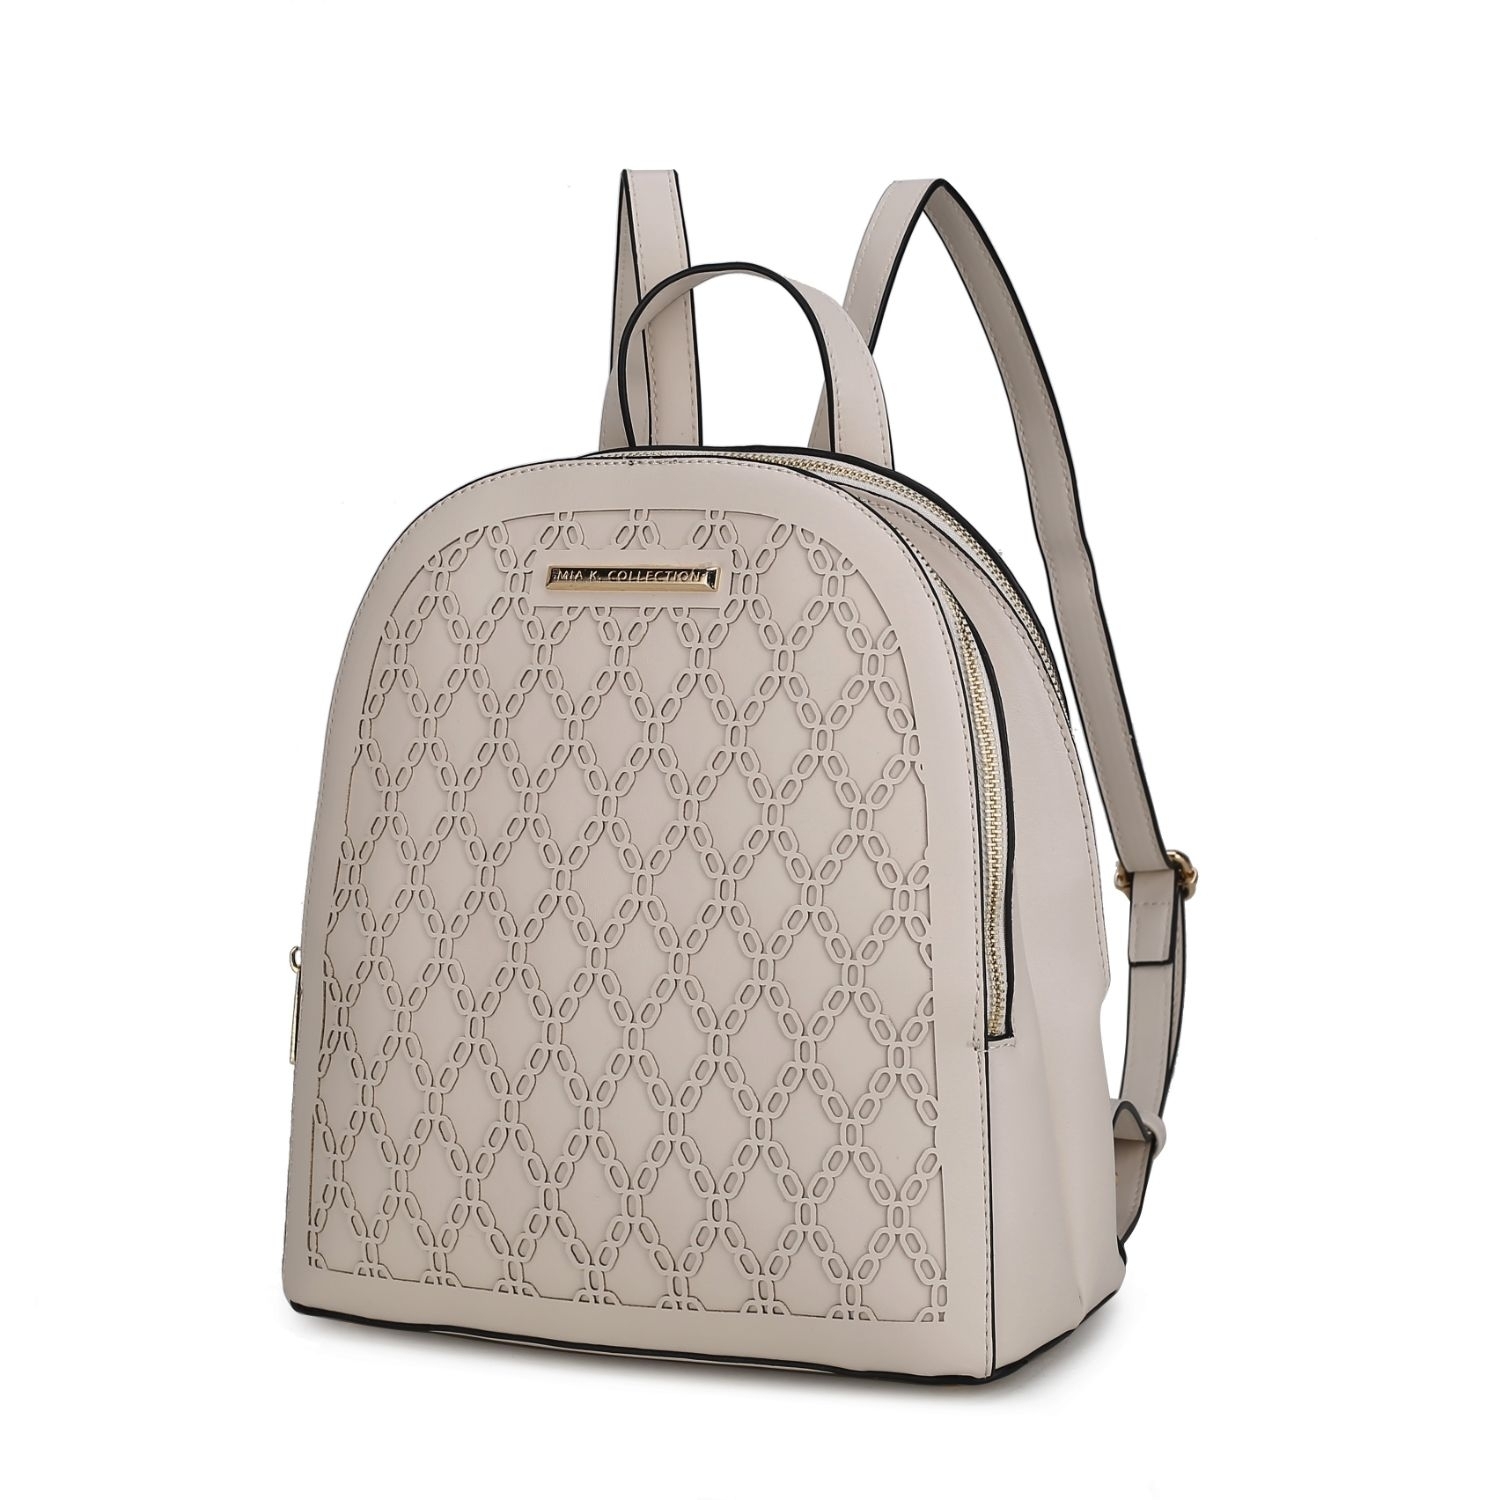 MKF Collection Sloane Vegan Leather Multi Compartment Backpack By Mia K. - Light Grey